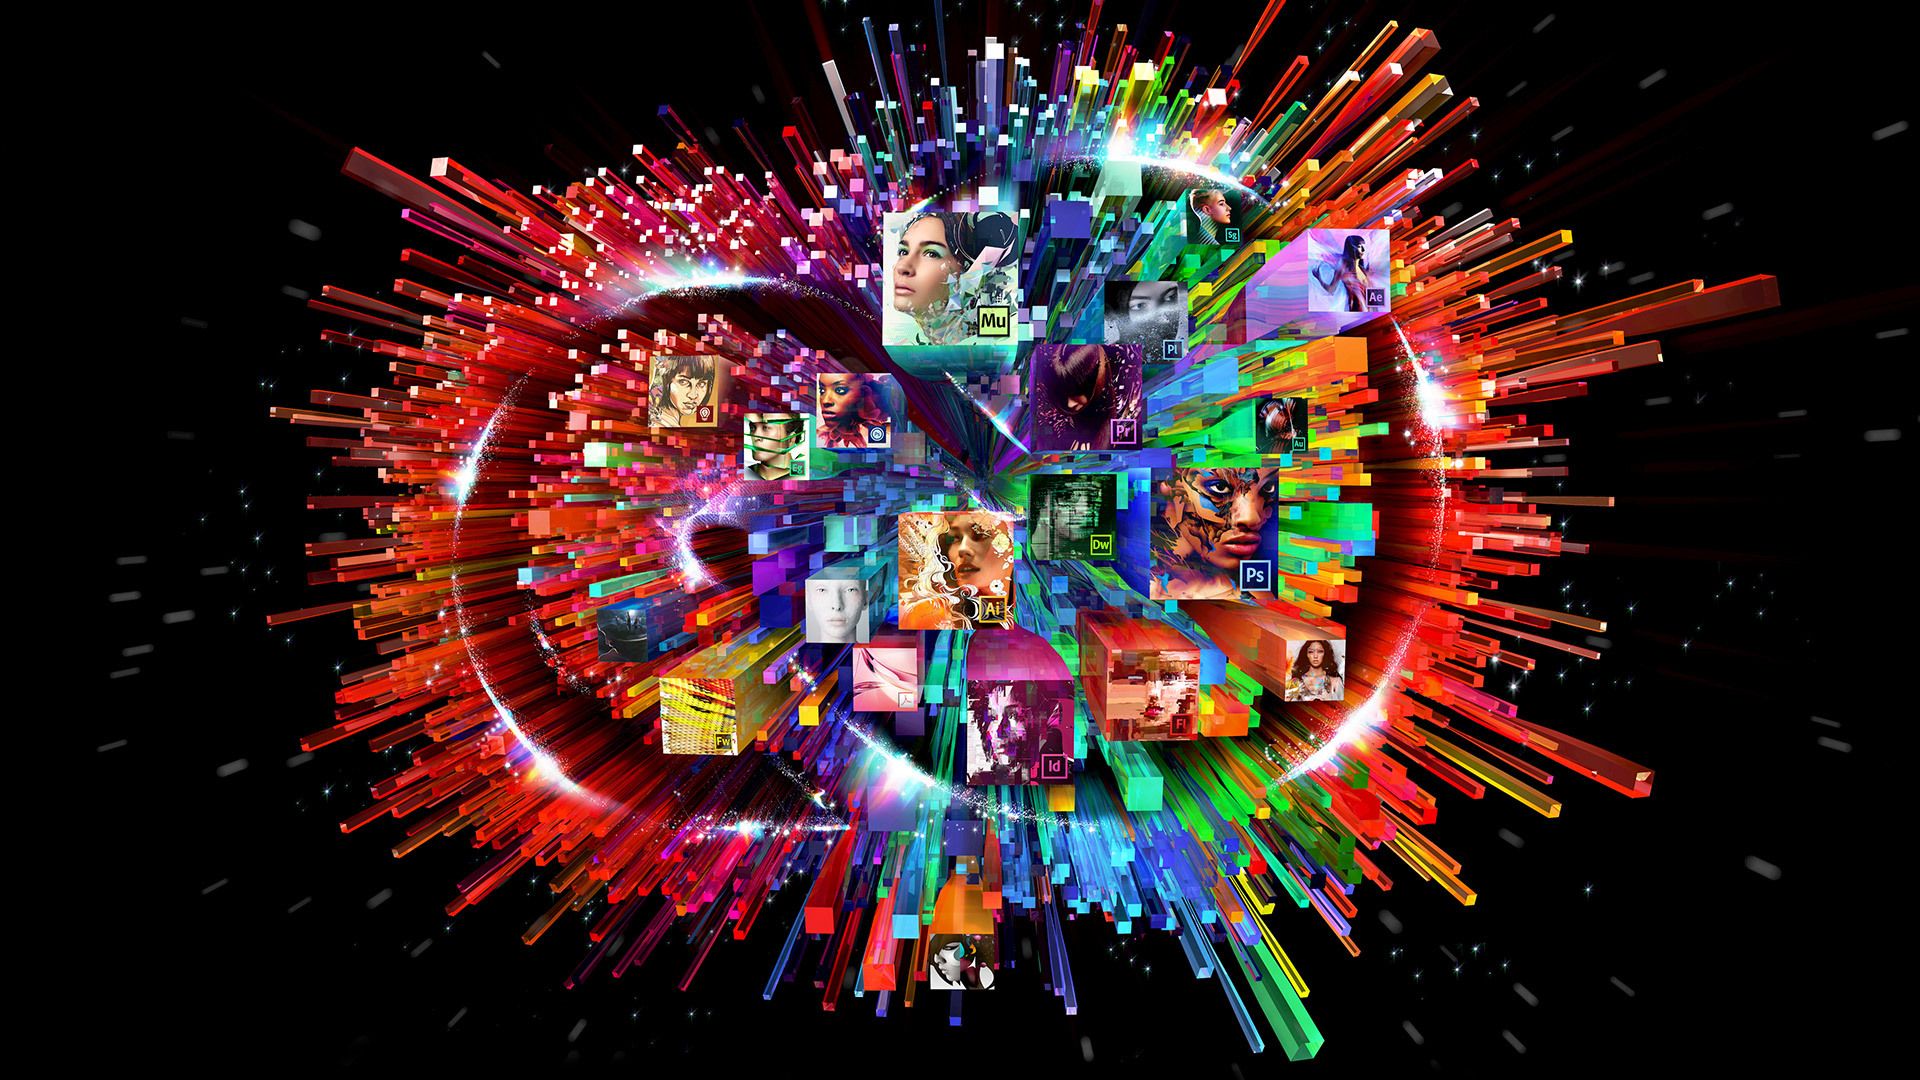 Adobe renews free trials of Creative Cloud 2015 to preview new features: Digital Photography Review